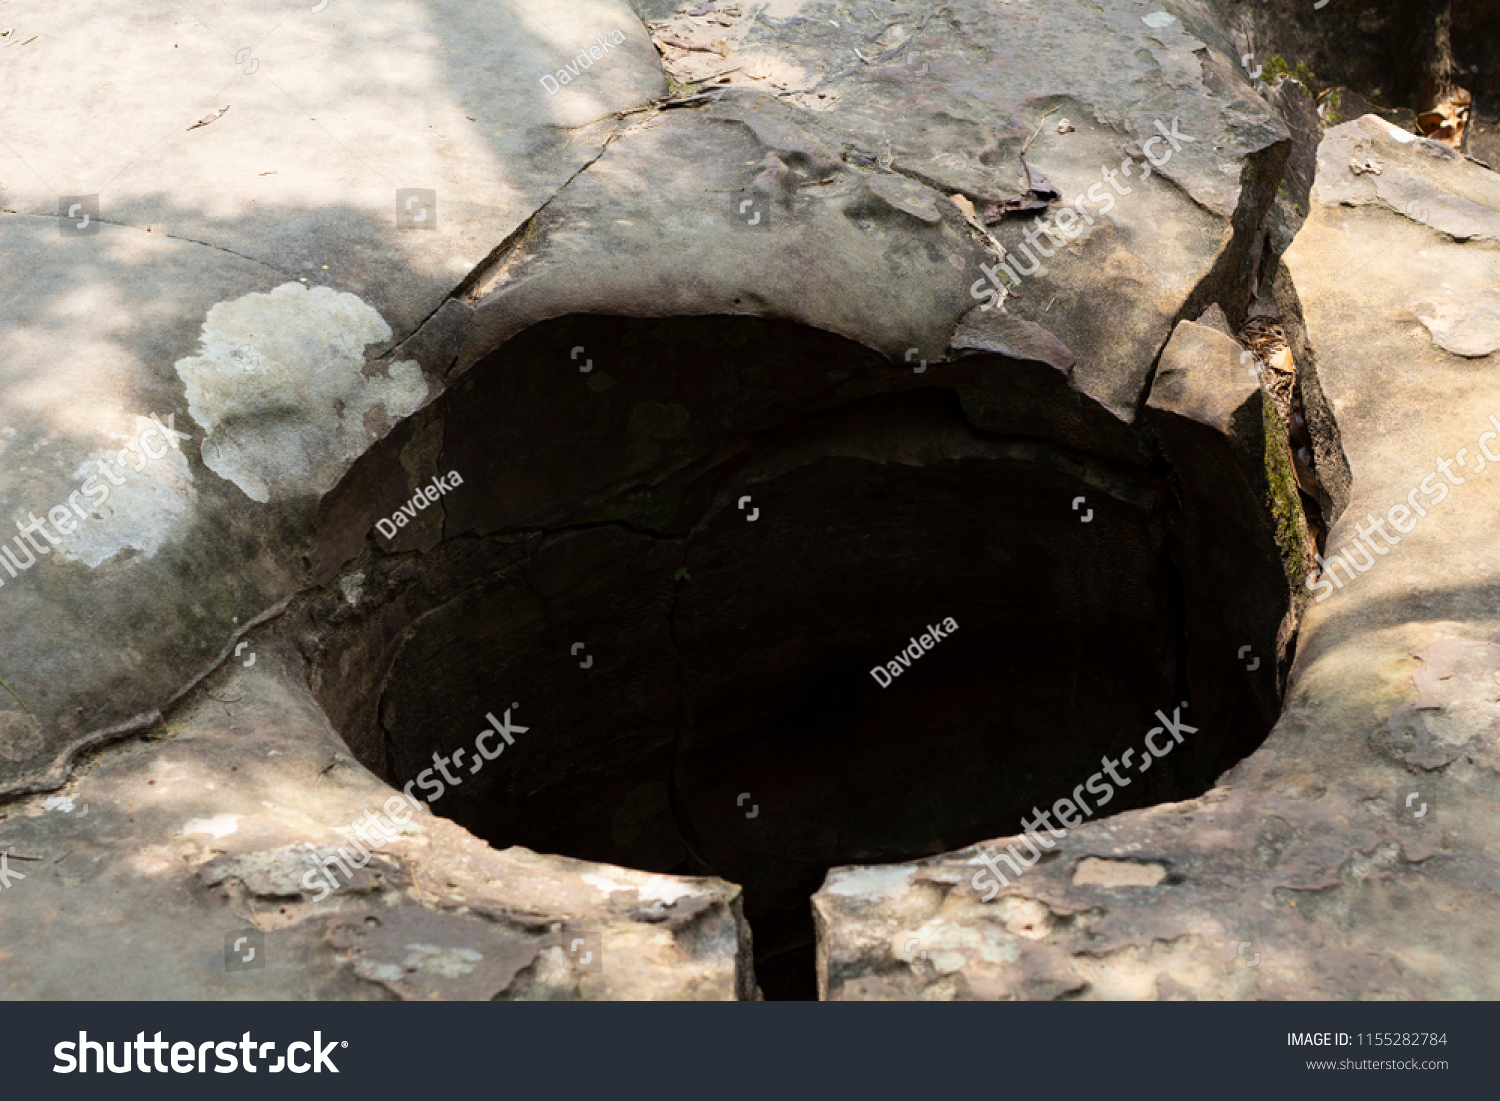 Water hole in solid rock, natural landscape formation. Geological formation of stone mountain. Water flow channel. Cracked rock. Geographical feature of rock in tropical jungle. Kbal Spean in Cambodia #1155282784